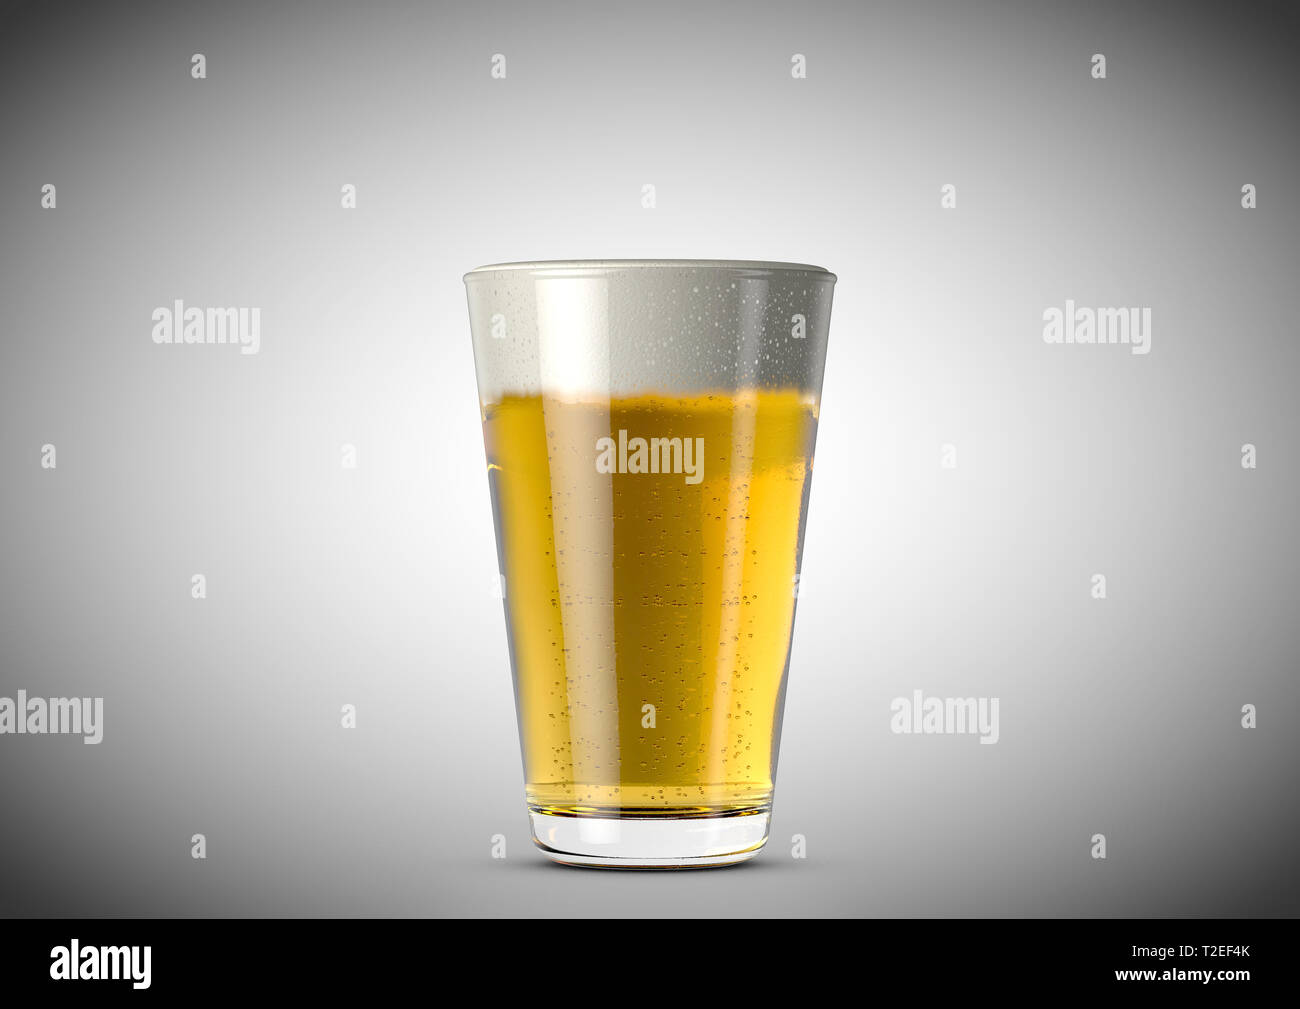 https://c8.alamy.com/comp/T2EF4K/a-shaker-pint-shaped-beer-glass-filled-with-beer-and-a-head-of-foam-on-an-isolated-white-background-3d-renders-T2EF4K.jpg